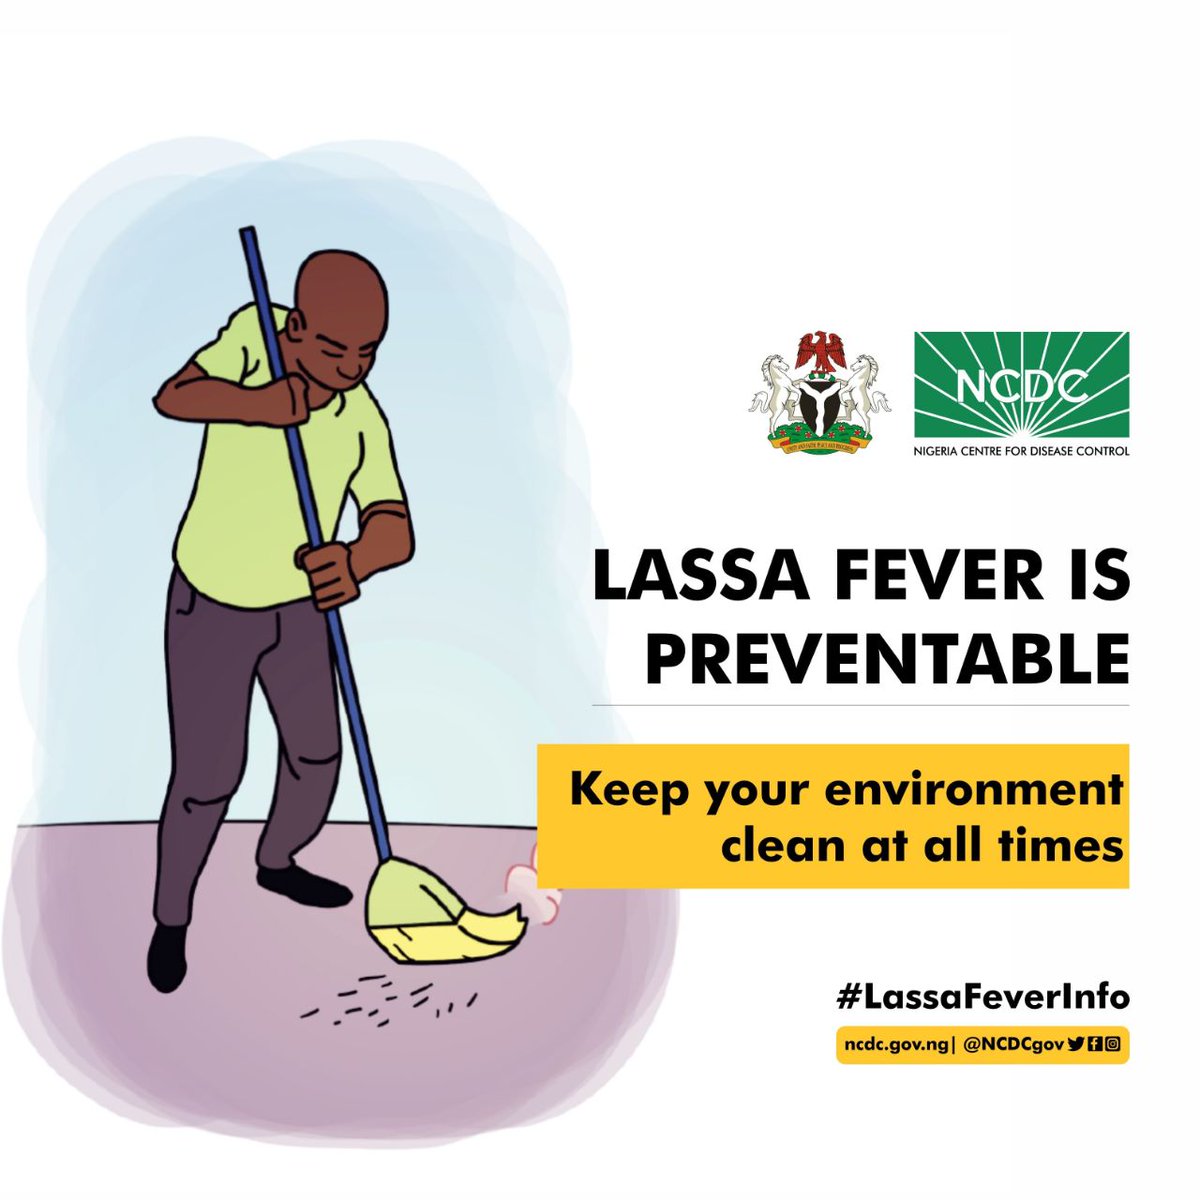 Prevention of #LassaFever relies on promoting good “community hygiene” to discourage rodents from entering homes. Let us all work together to reduce the risk of #LassaFever infection and spread in our homes and communities.